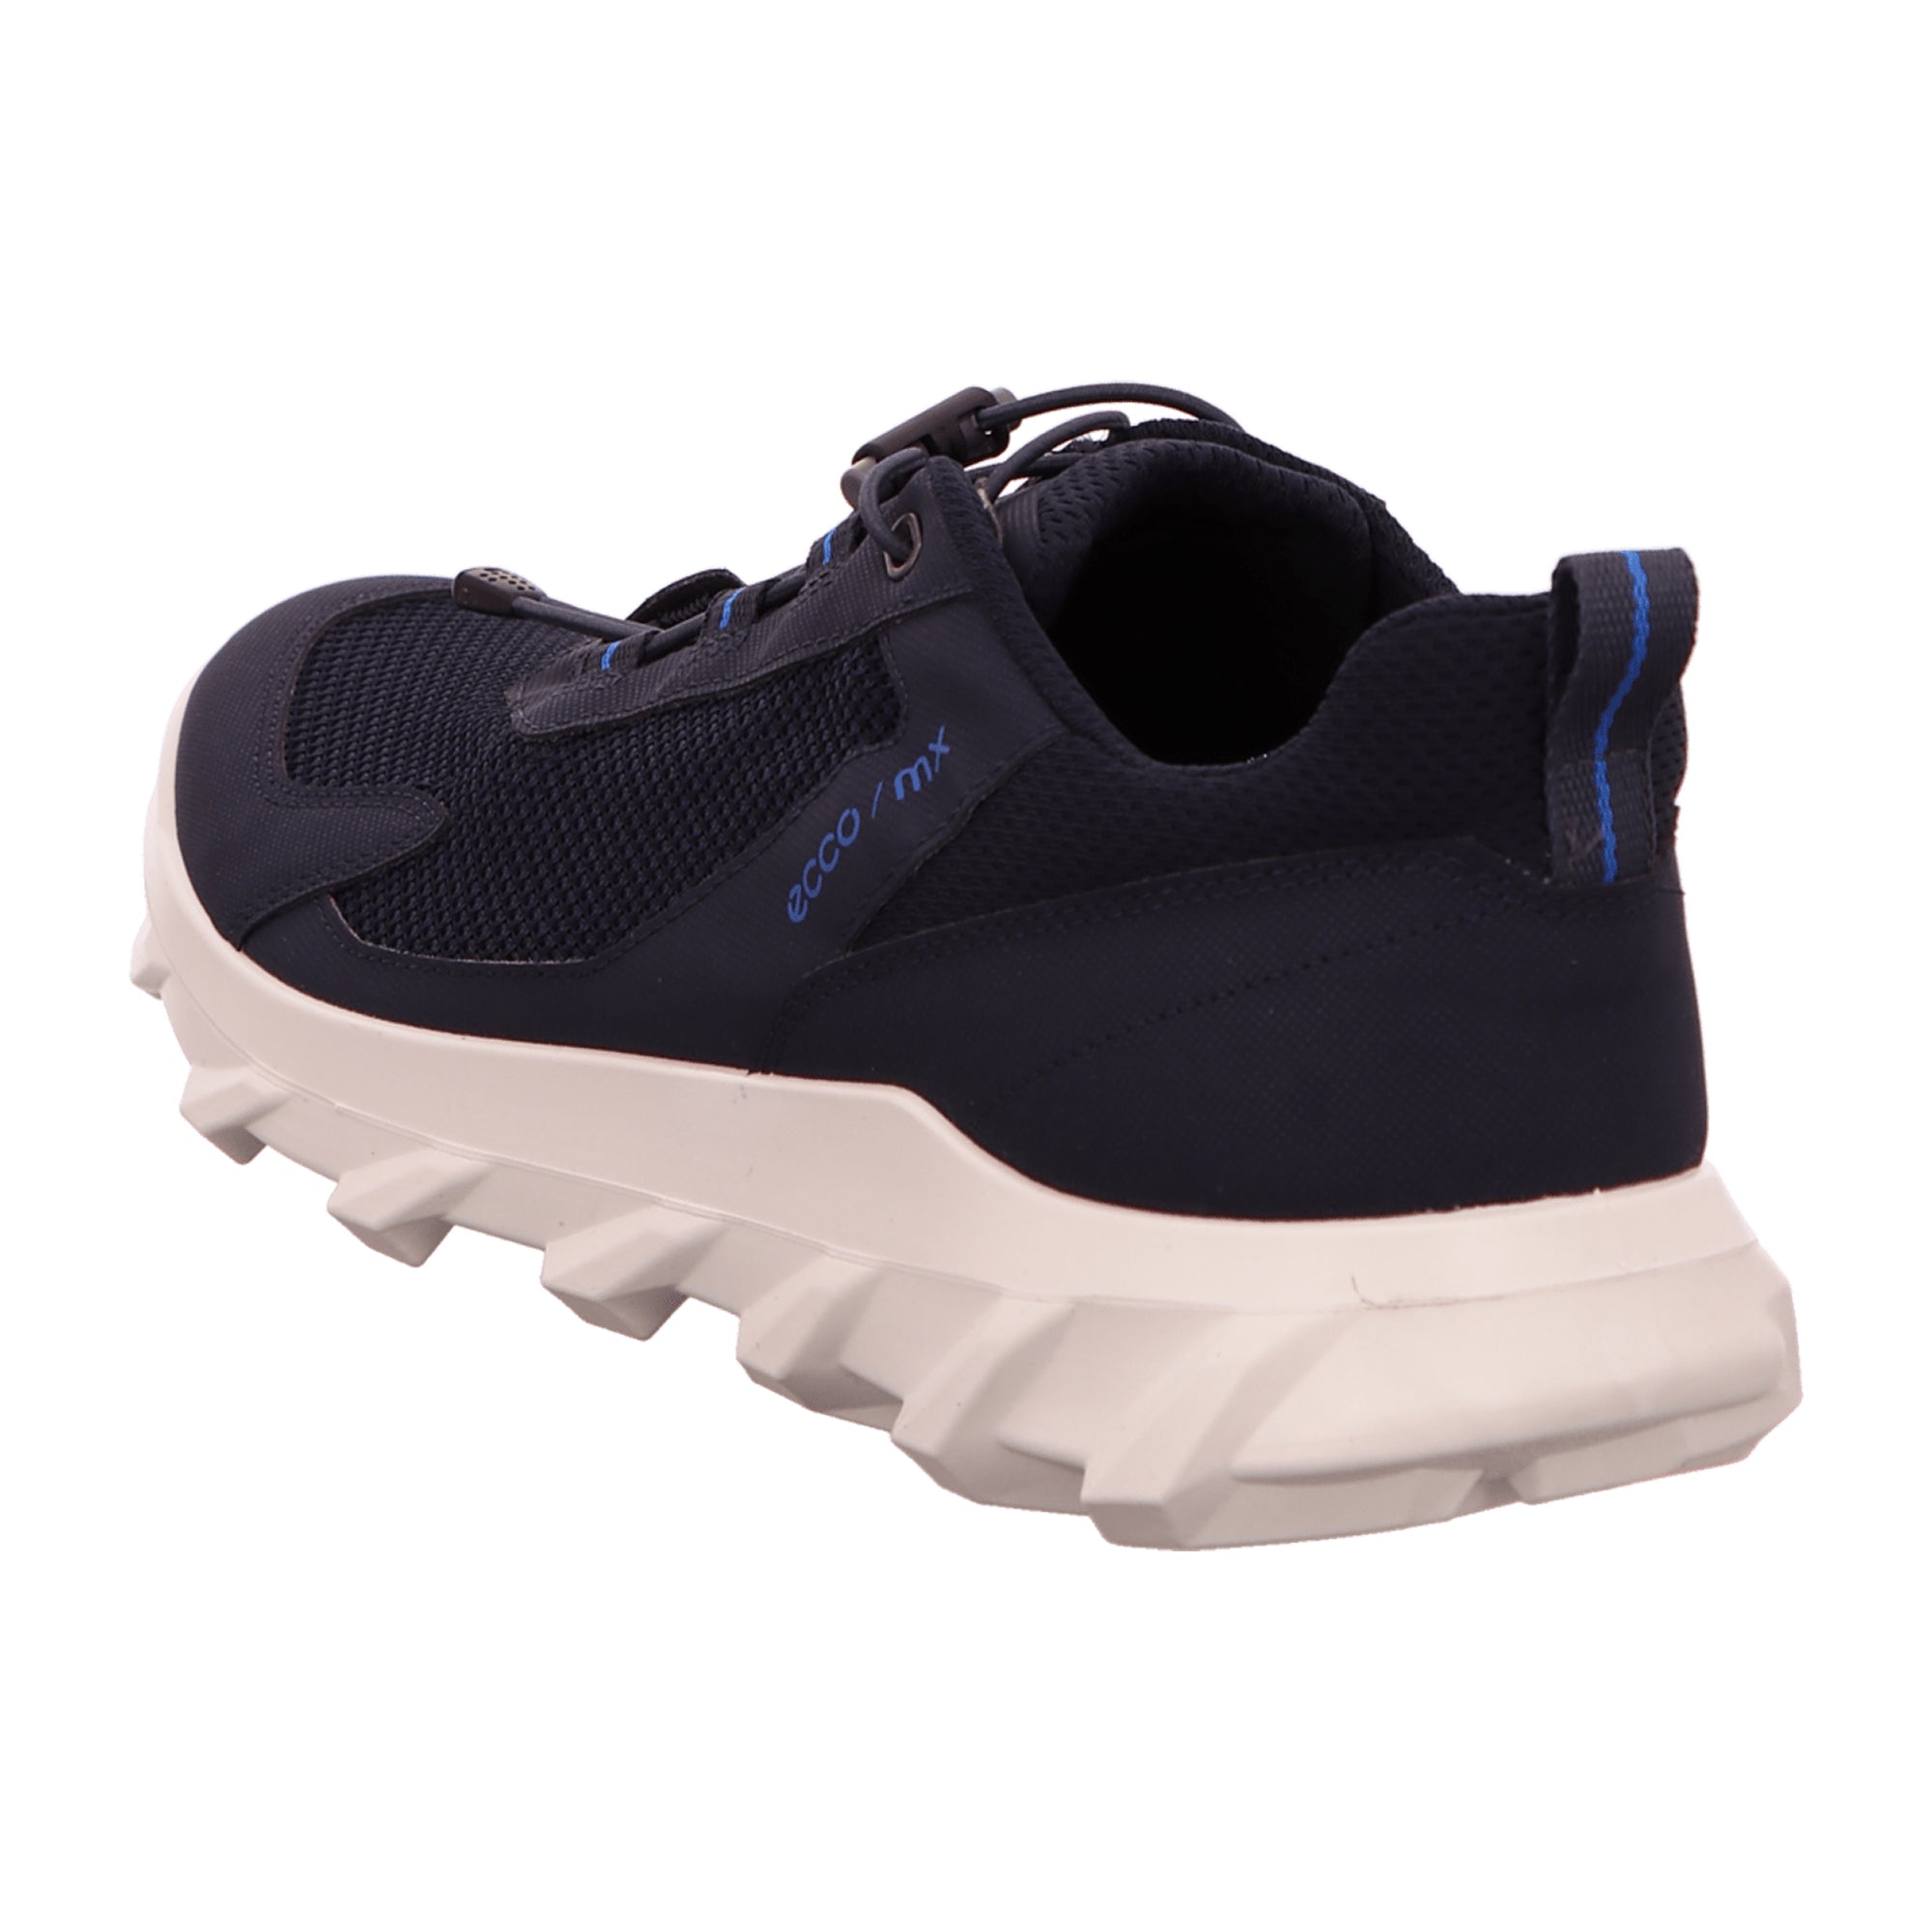 Ecco MX M Men's Outdoor Shoes in Stylish Blue